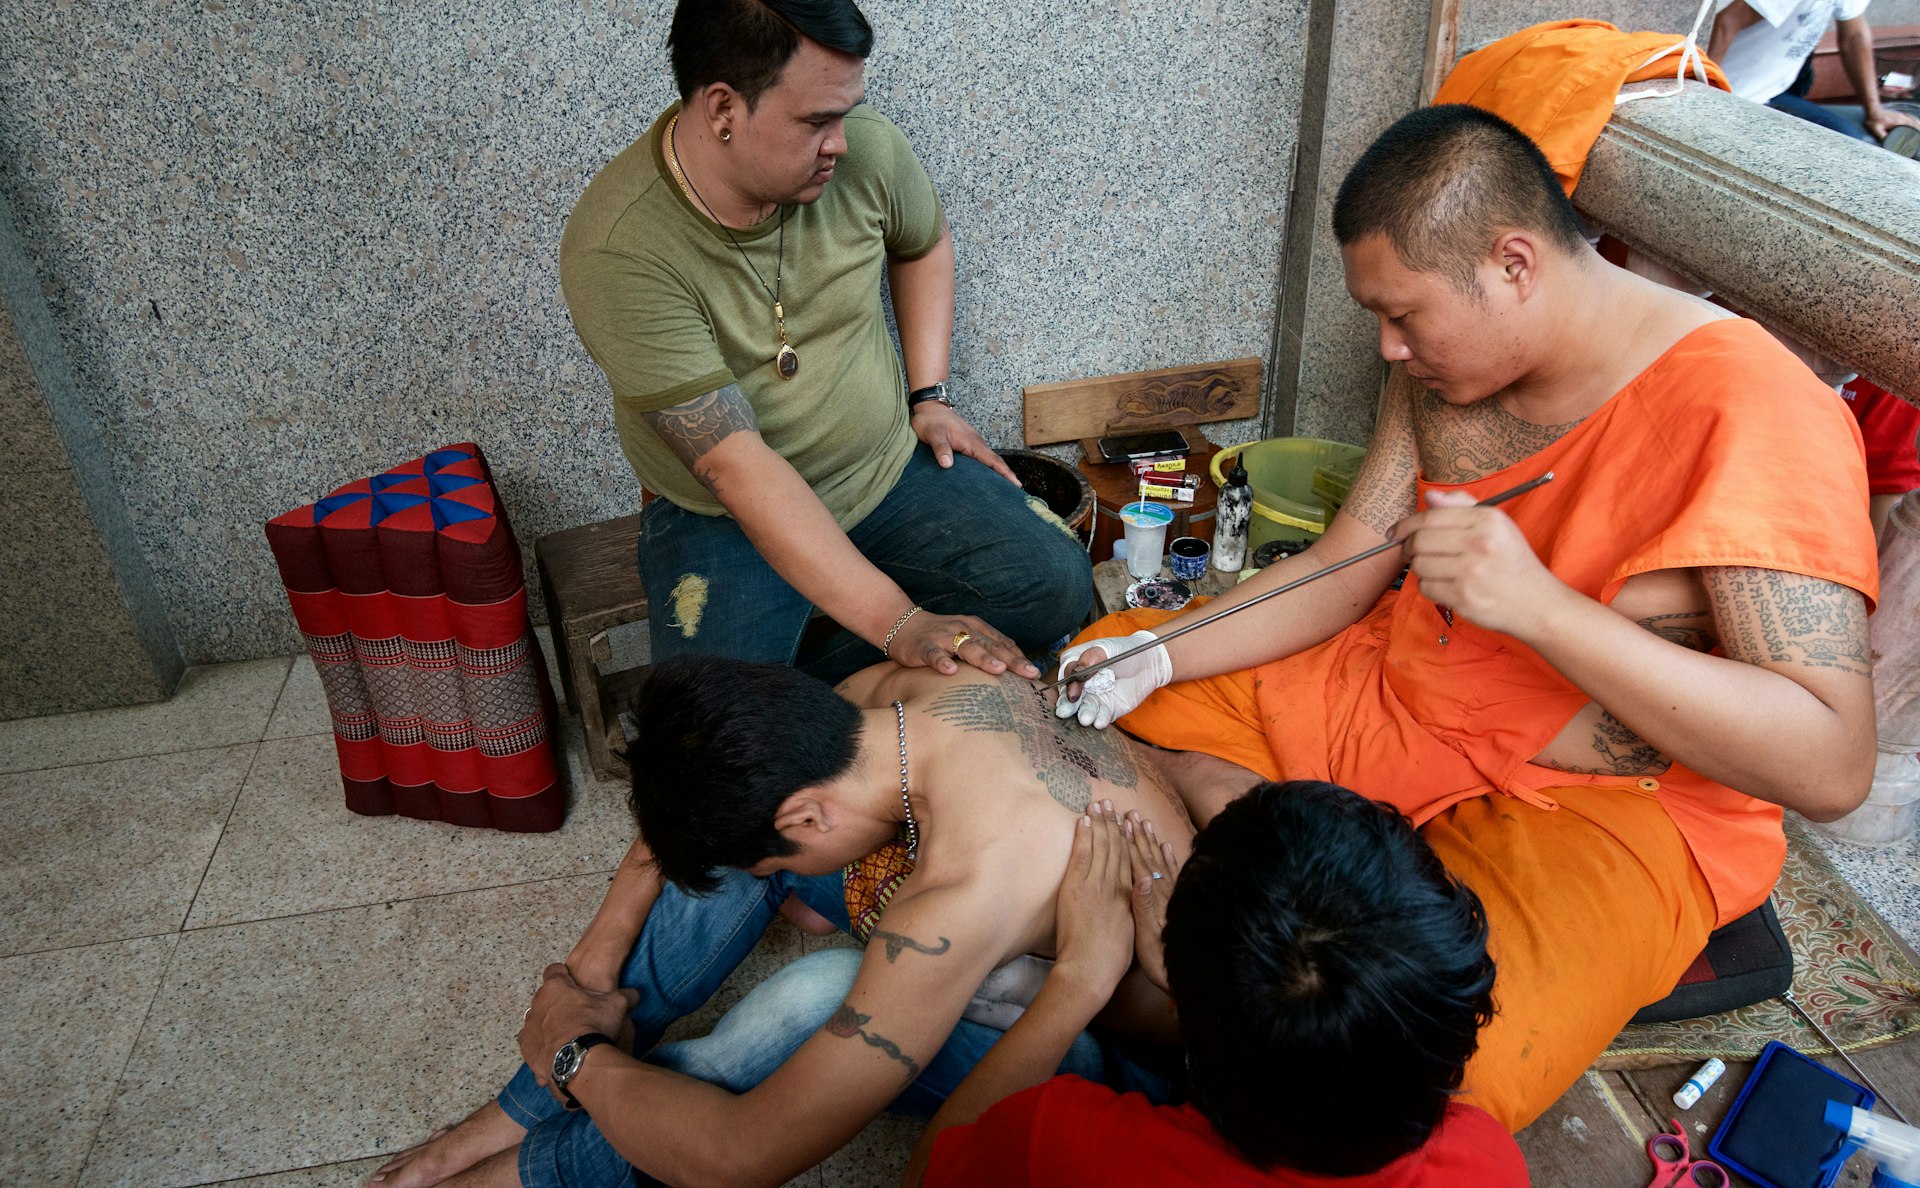 A man bends forward as his back is being tattooed by a Buddhist monk. He is being held by two men. 